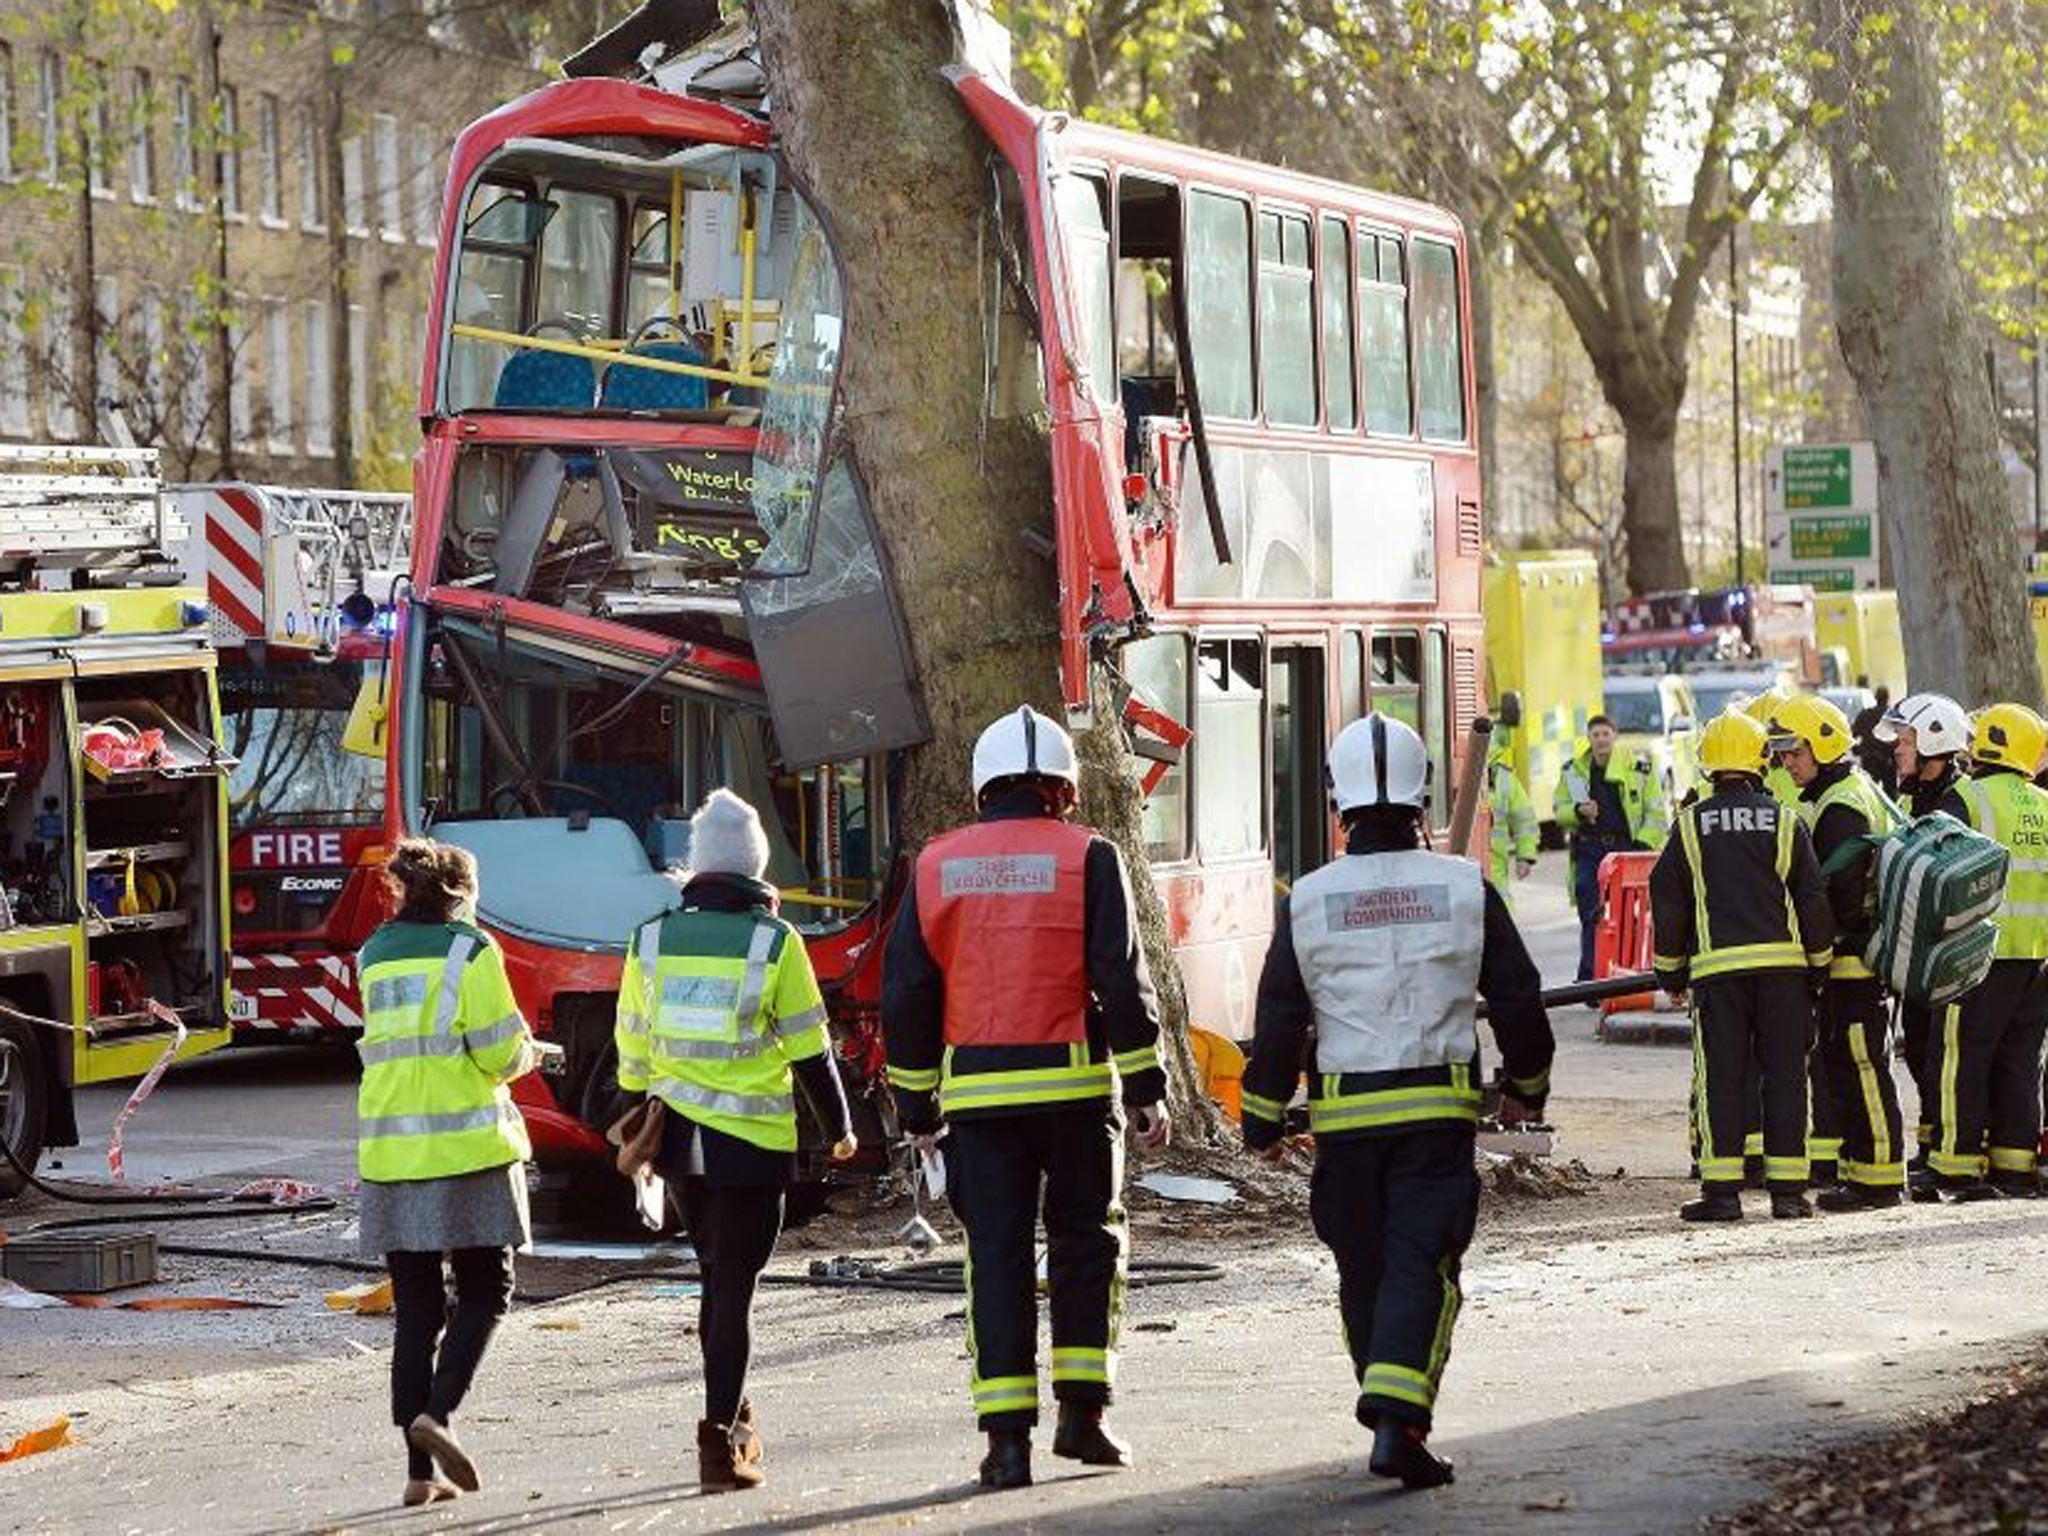 Police, ambulance and fire crews are on the scene of a bus crash in Kennington Road, south London in which a number of people have been injured.